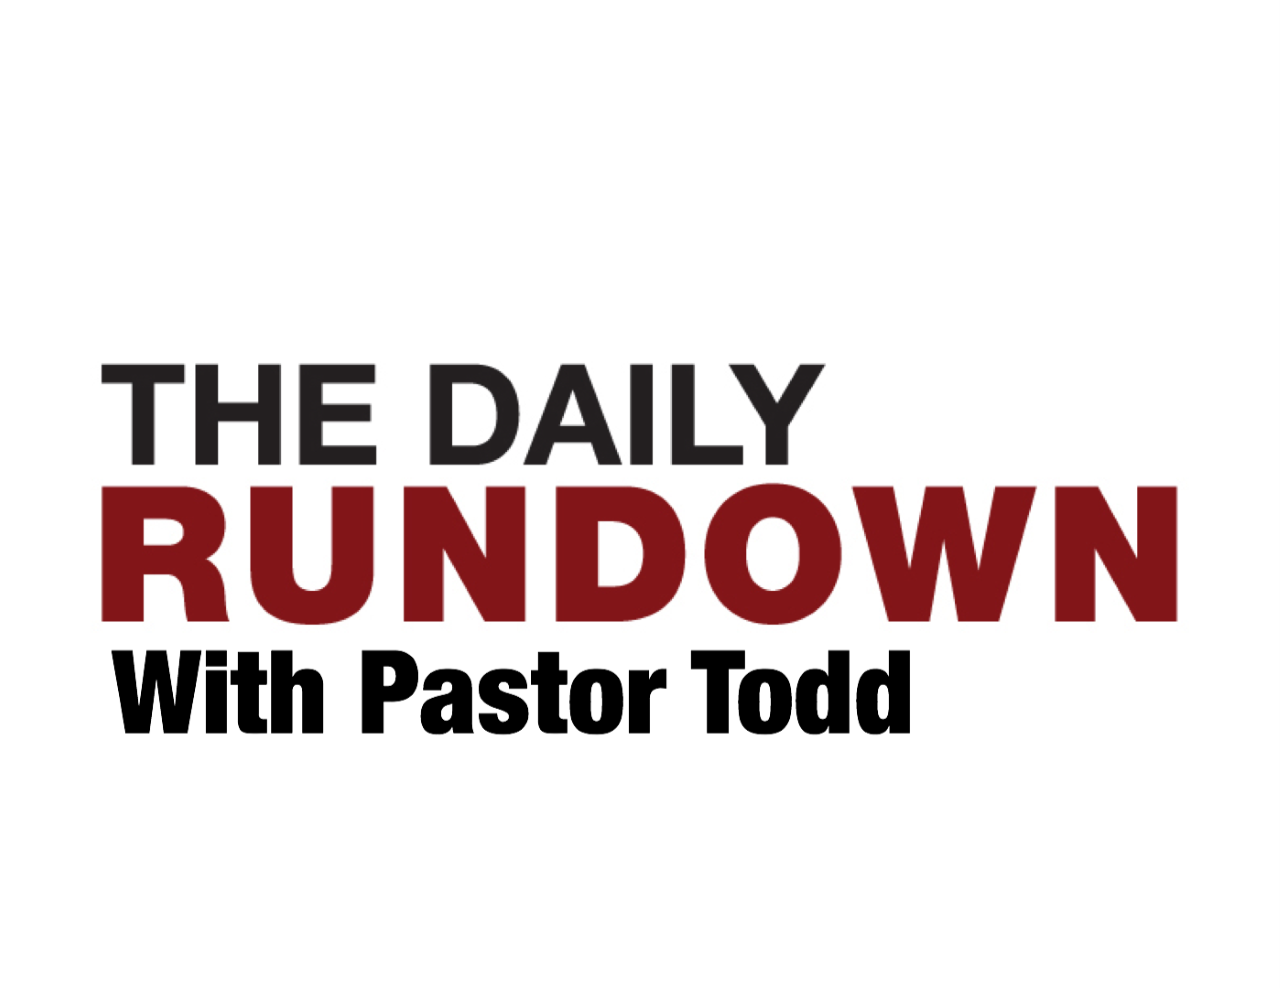 Remnant News: Daily Rundown with Pastor Todd 7/31/2020